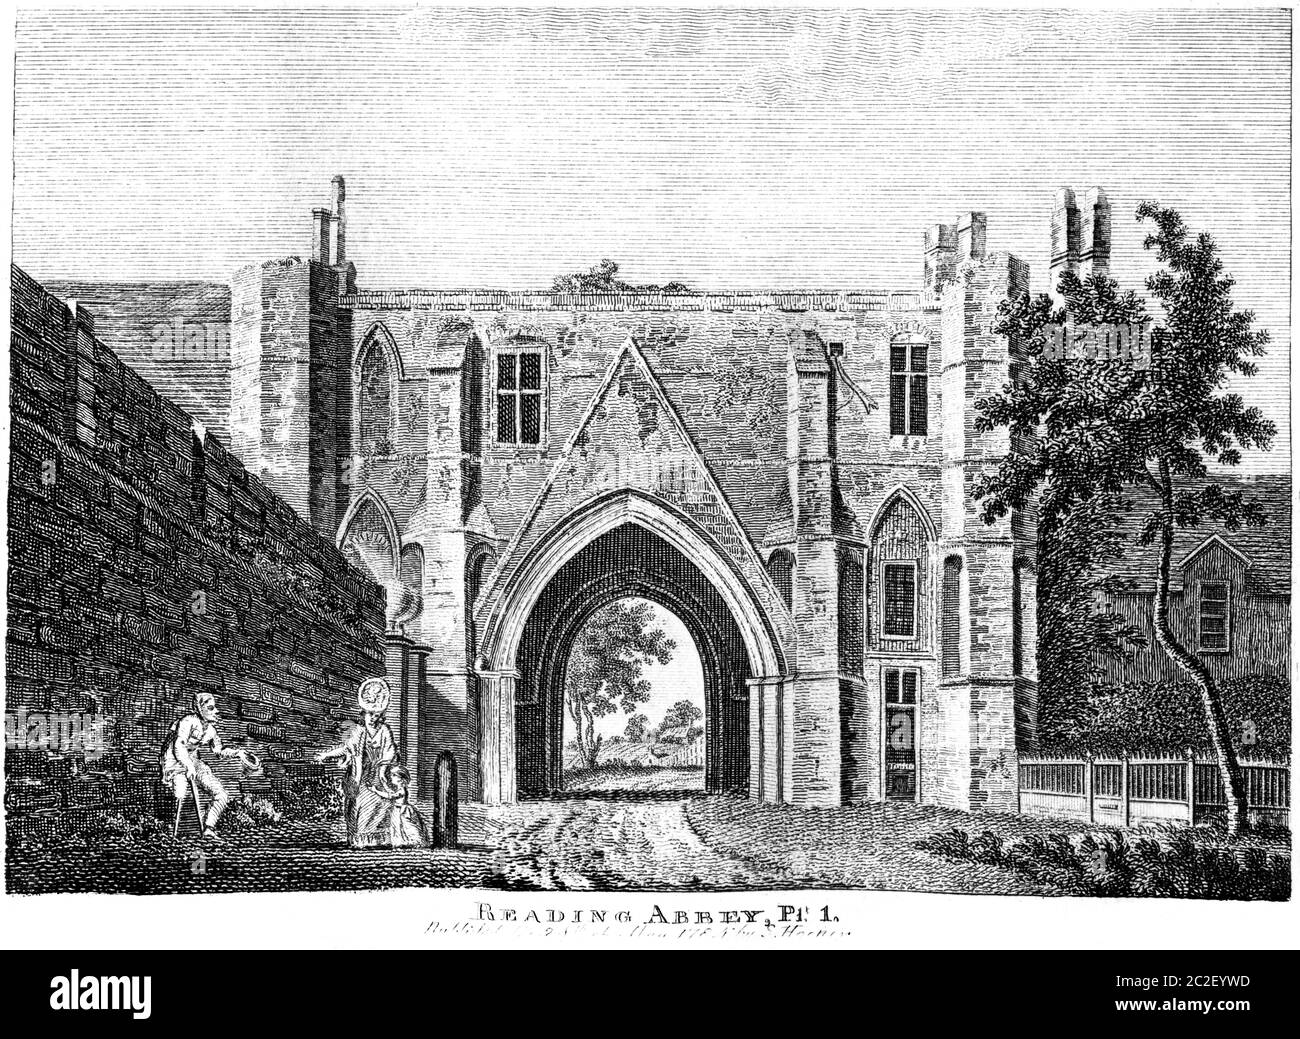 An engraving of Reading Abbey 24th May 1784 scanned at high resolution from a book published in the 1780s. Believed copyright free. Stock Photo